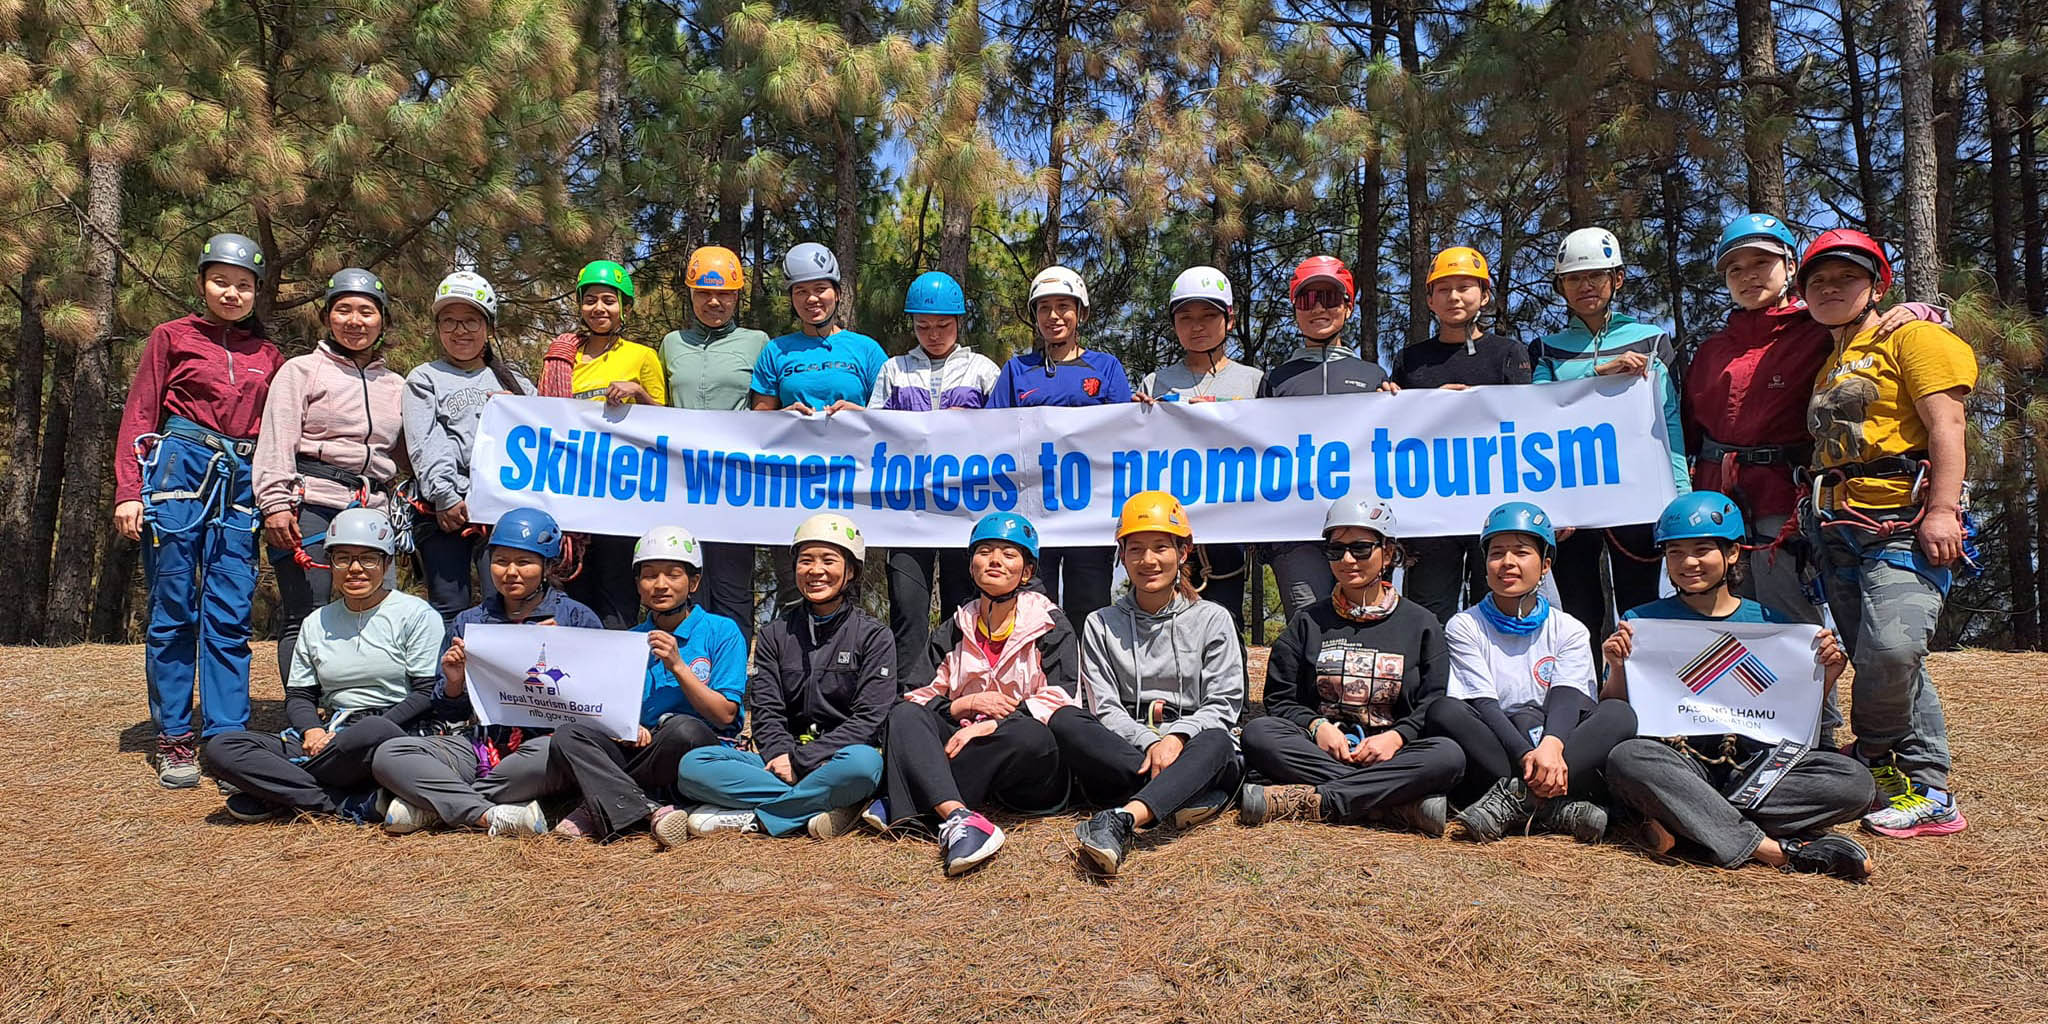 NTB organizes rescue training for female guides